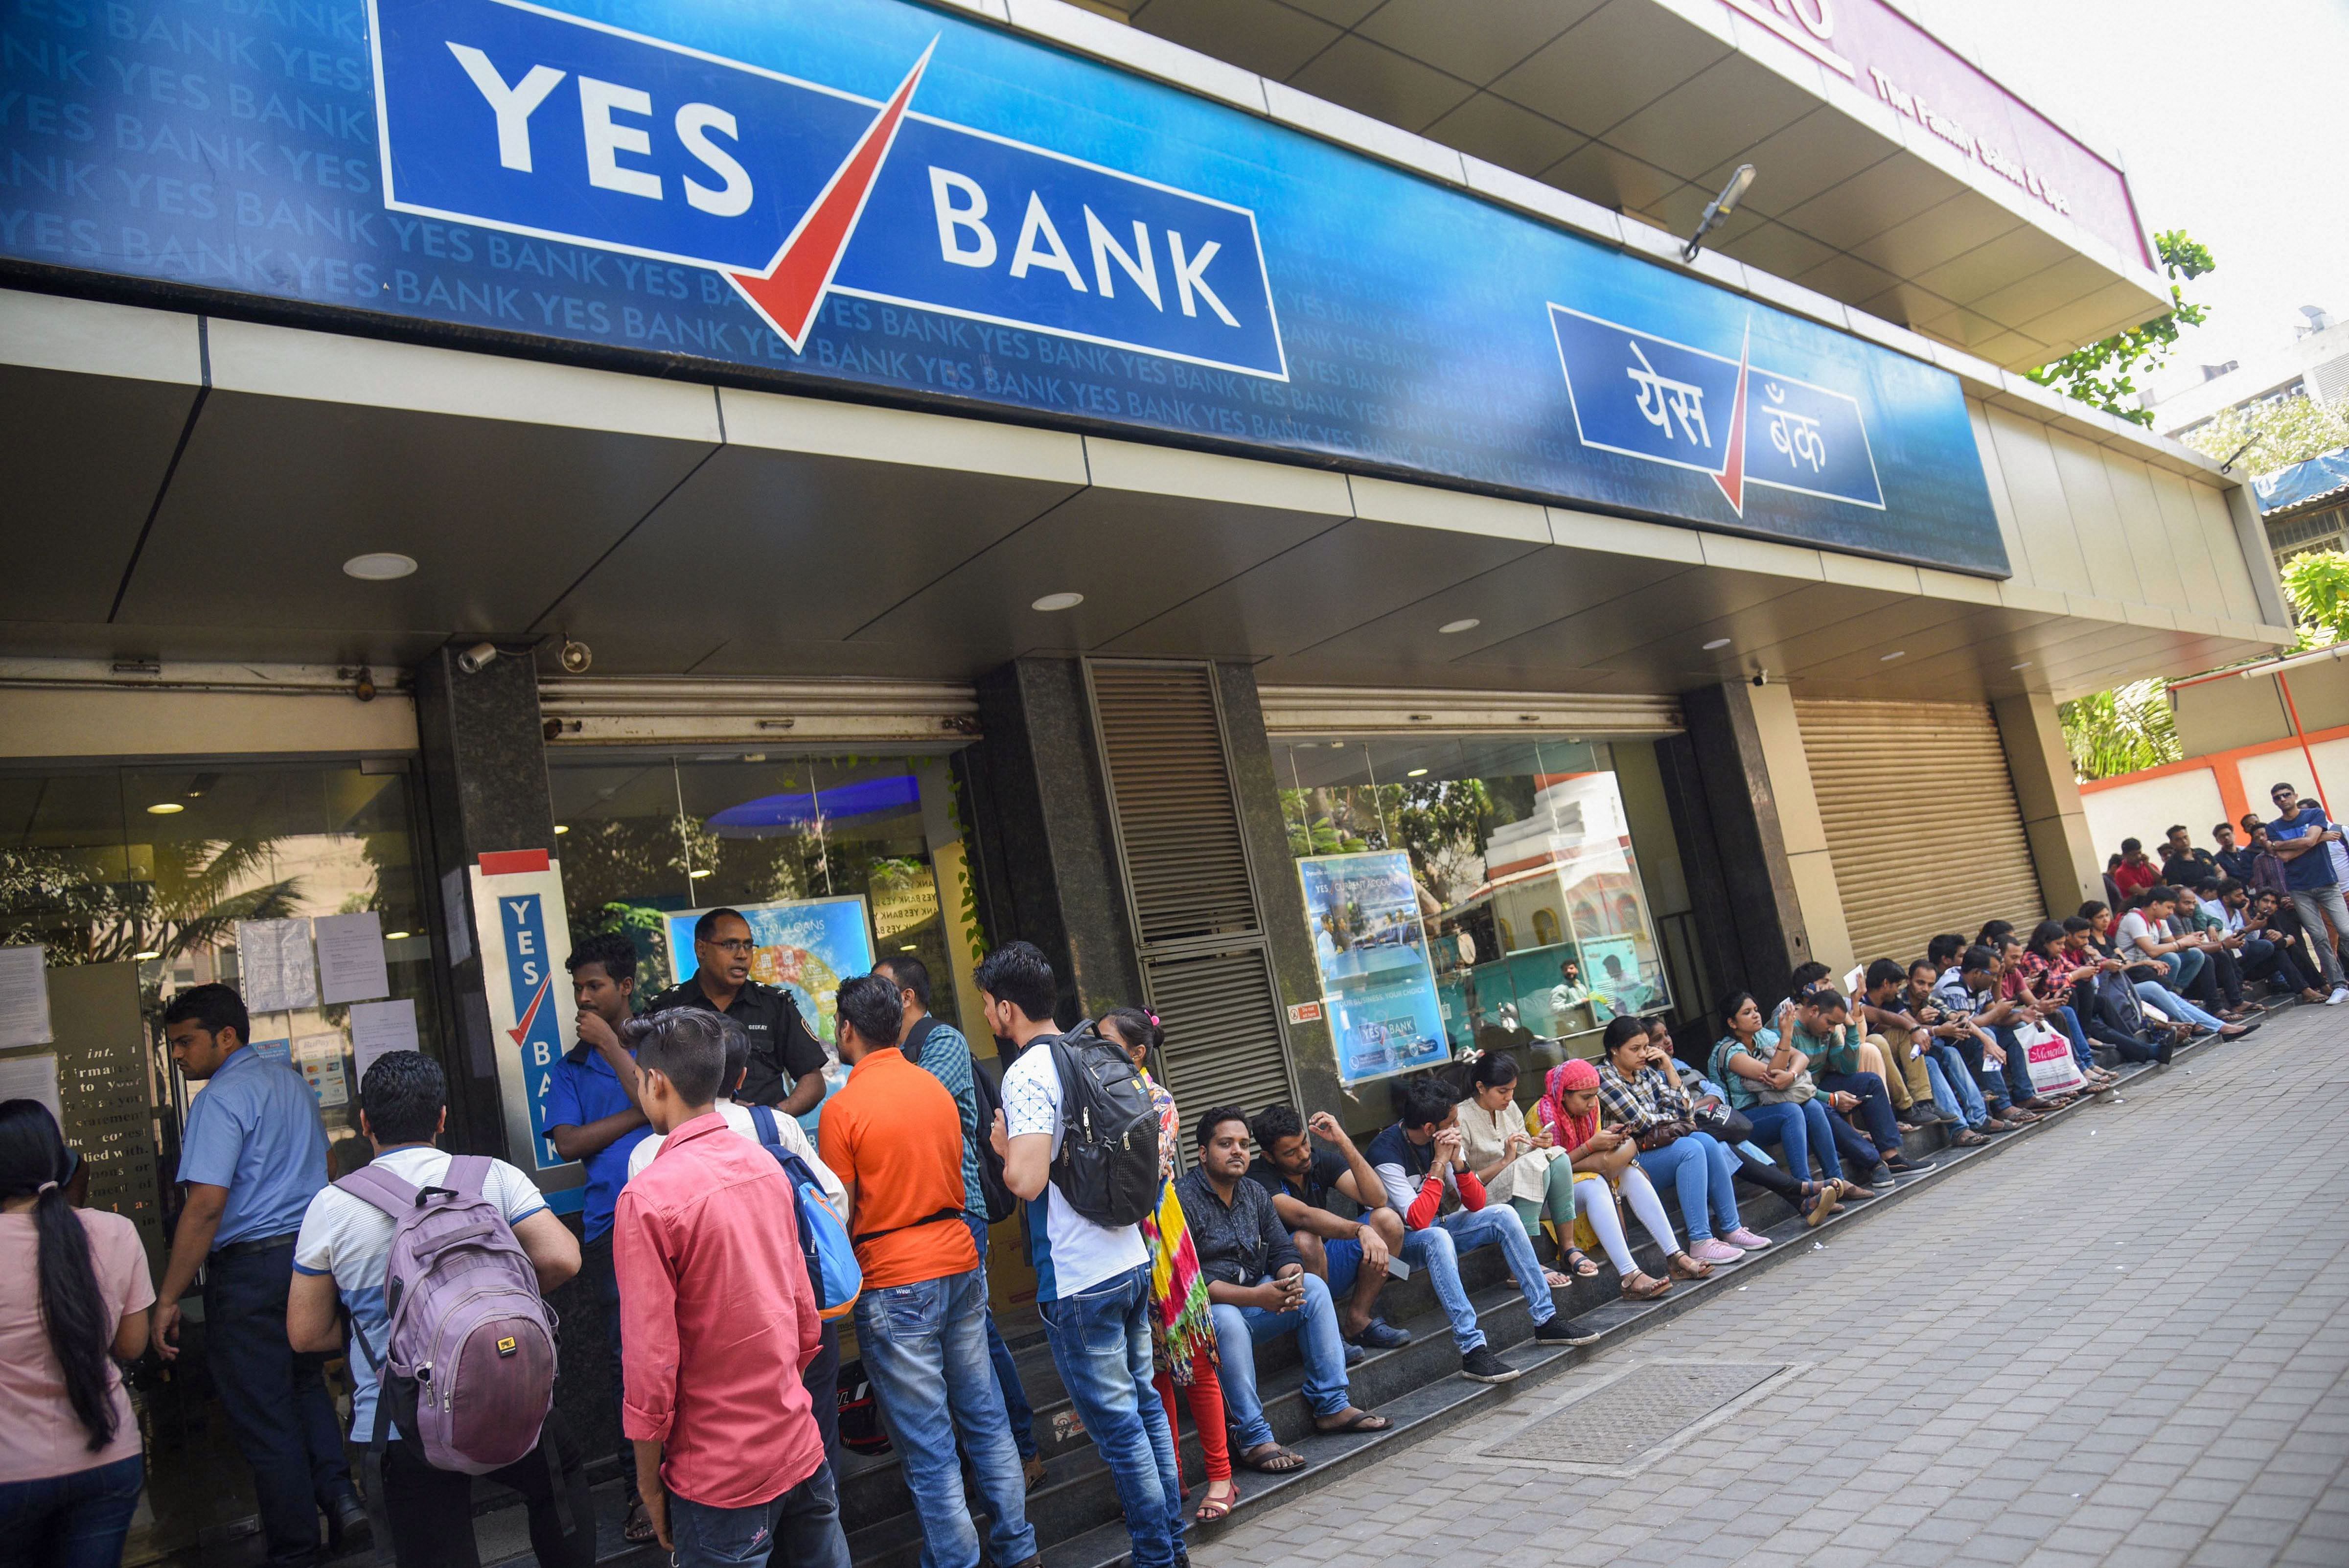 Account holders queue up outside Yes Bank to withdraw money, in Mumbai, Saturday, March 7, 2020. (Credit: PTI)